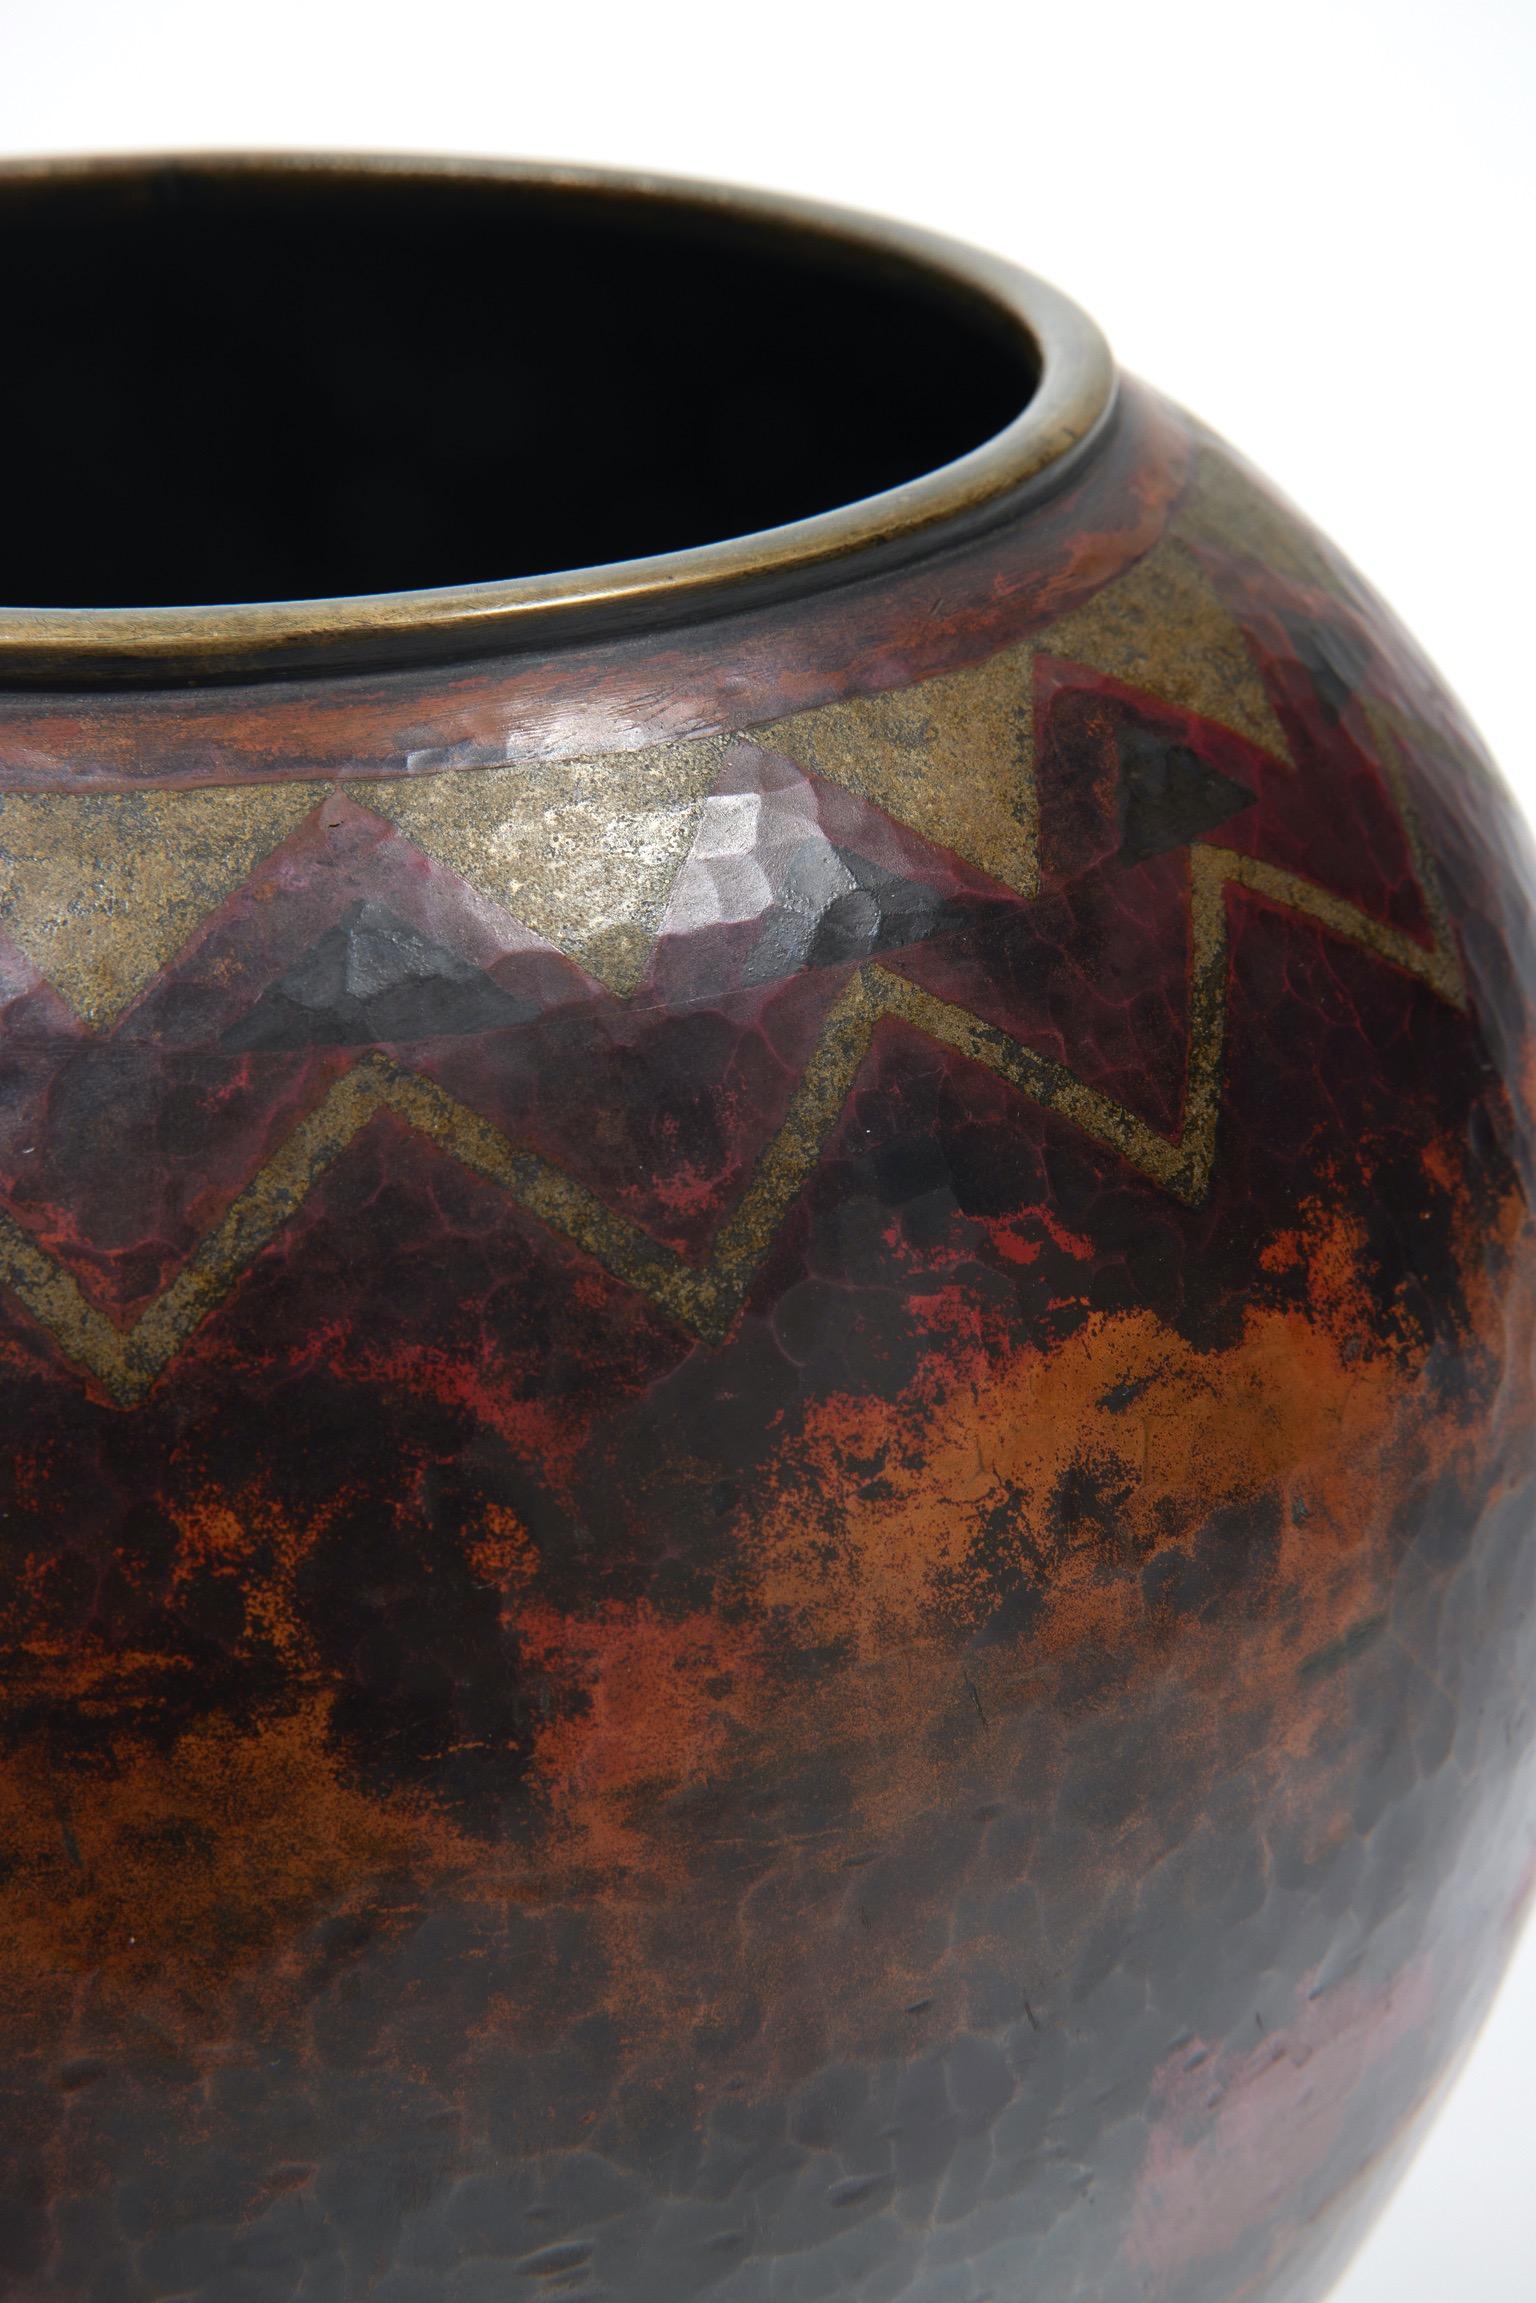 Spherical vase on light heel and with a wide annular neck. 
Proof in copperware mounted with a hammer.
Decoration realized with fire patina and silver inlays on a background, also fire patinated, red richly shaded with ochre and anthracite.